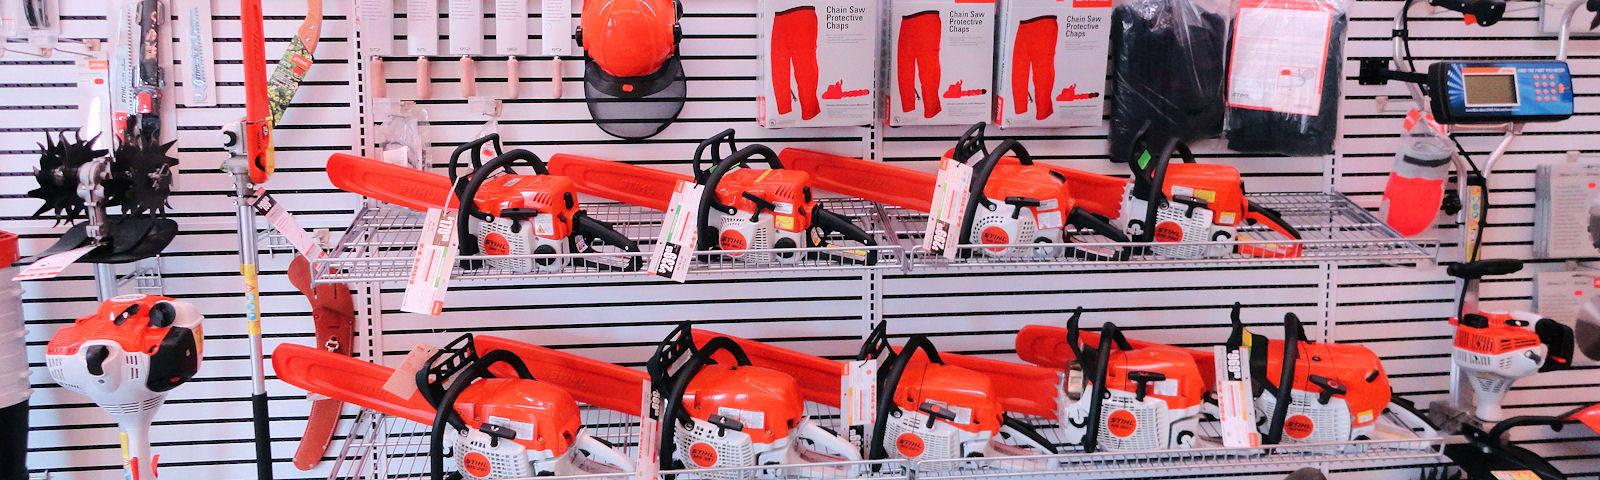 WE HAVE A LARGE SELECTION OF CHAIN SAWS AND PROTECTIVE GEAR